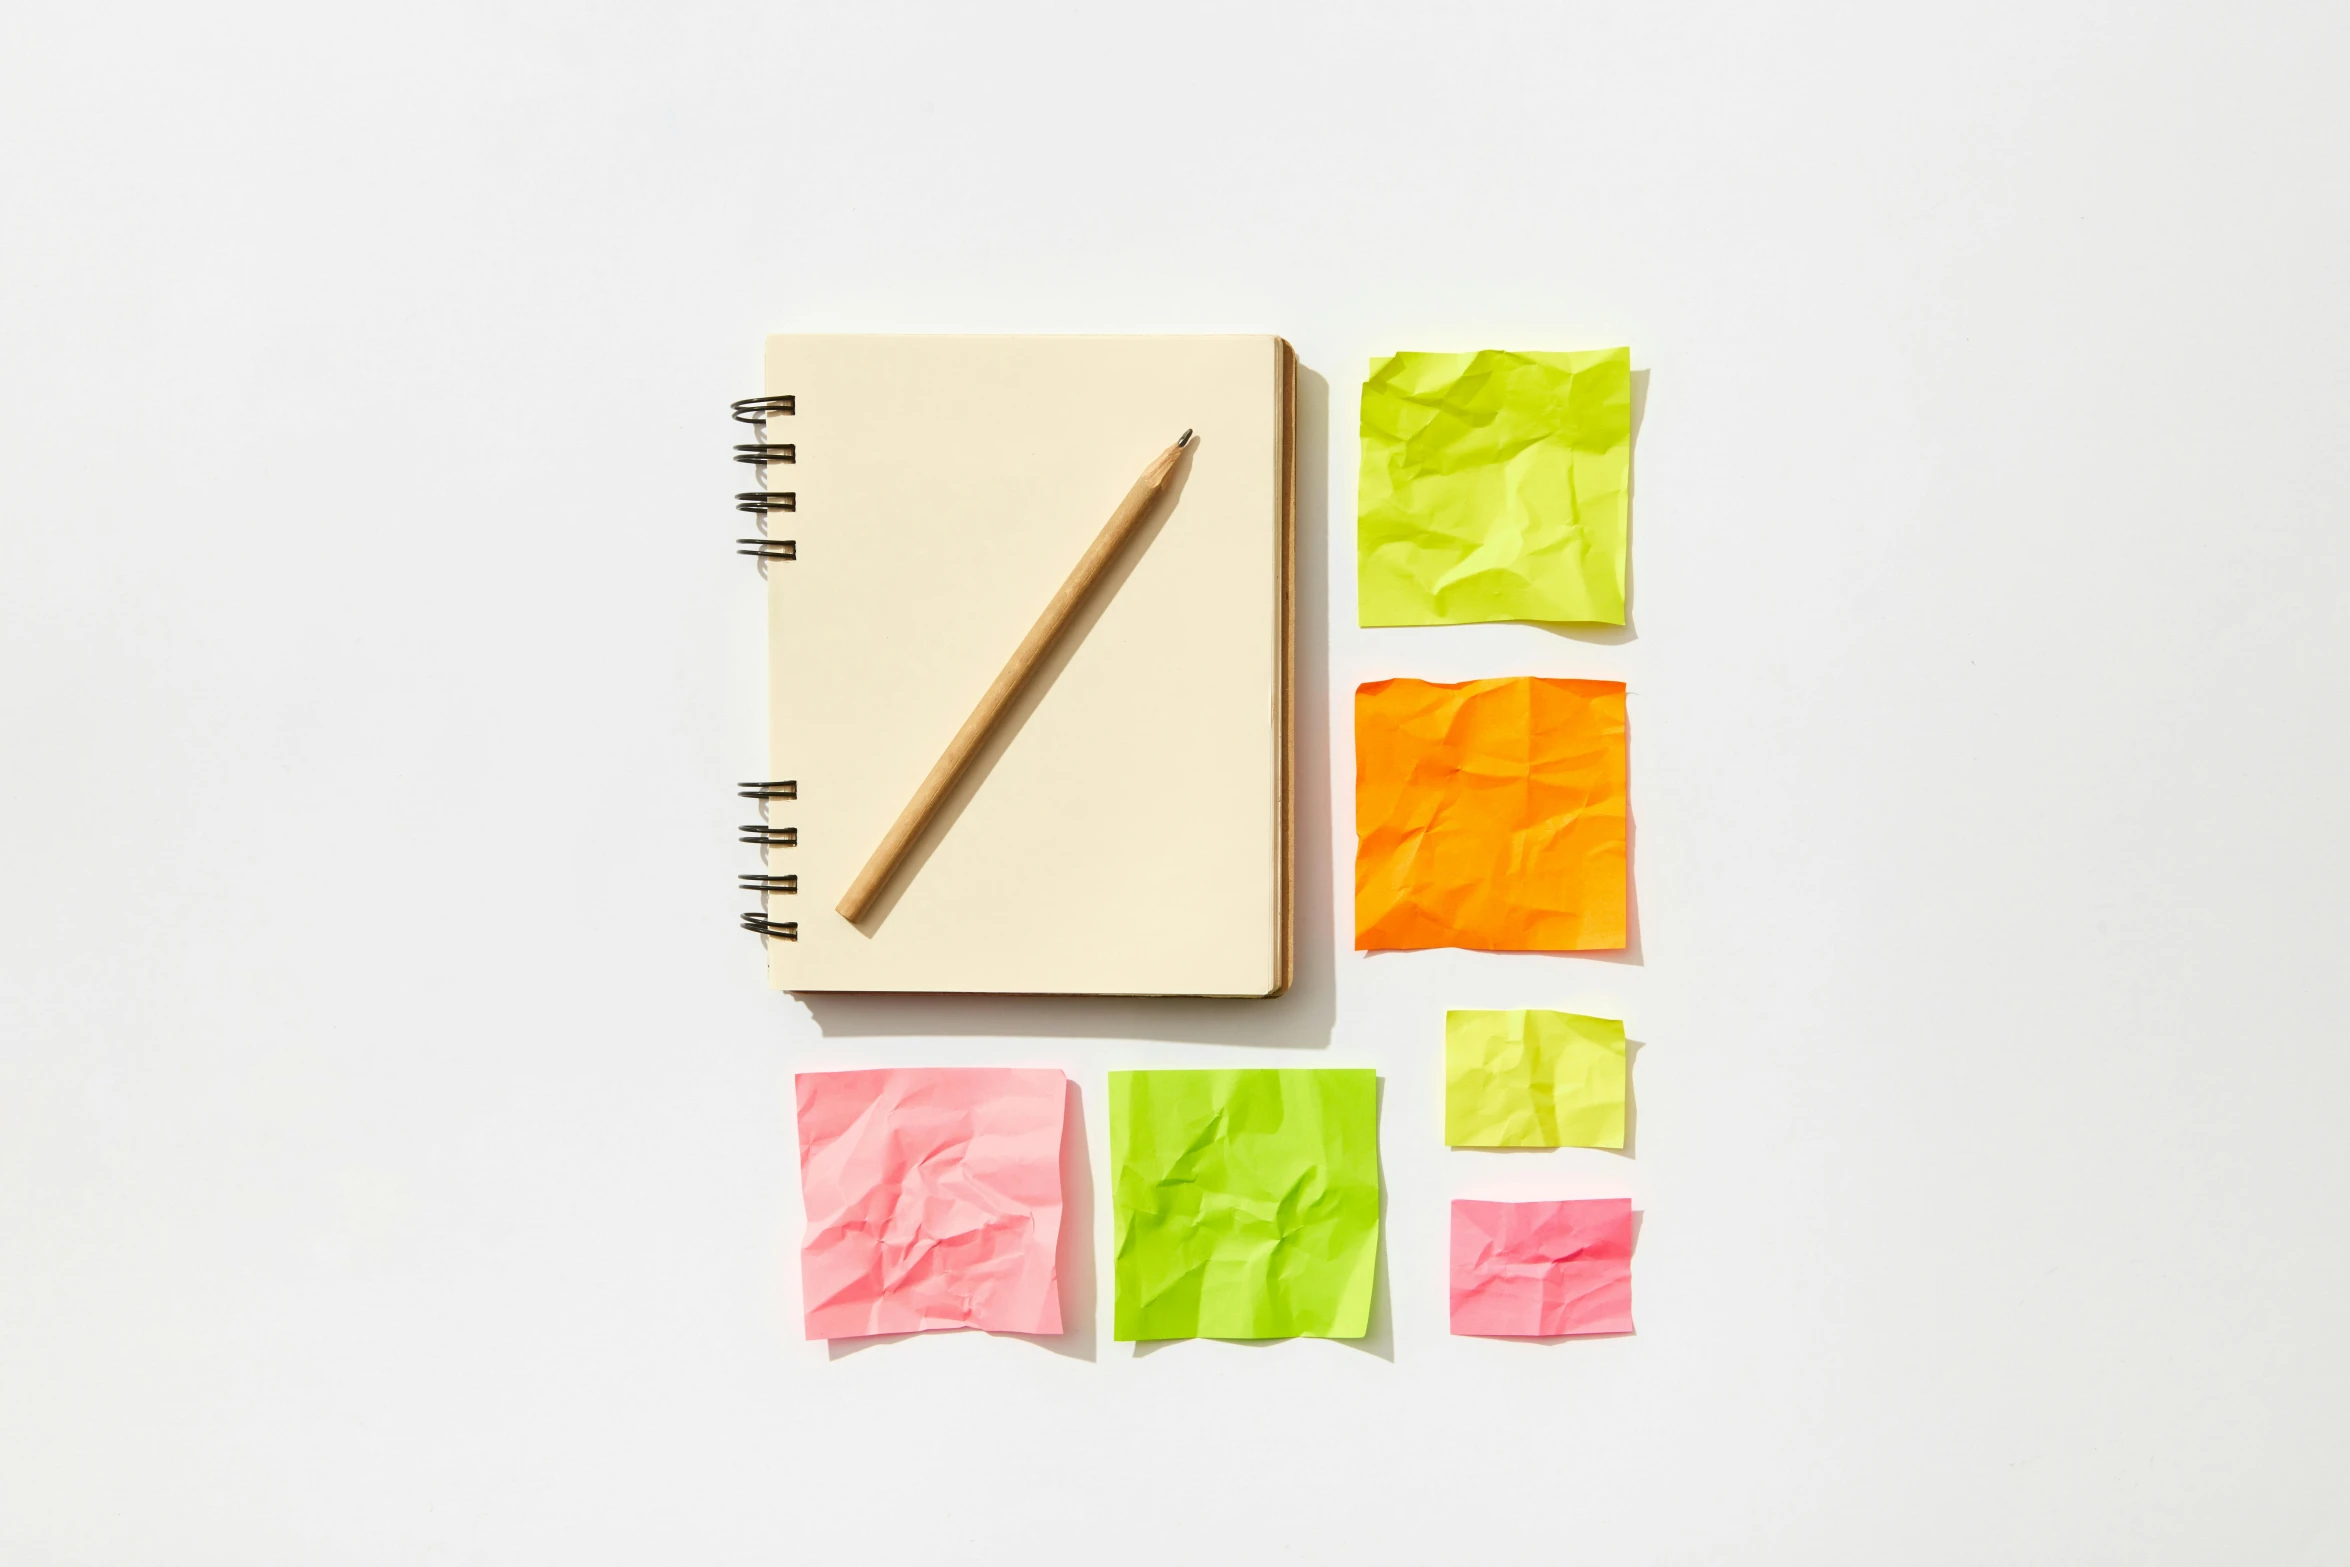 a notepad with a pencil sitting on top of it, stickers, square shapes, thumbnail, plain white background